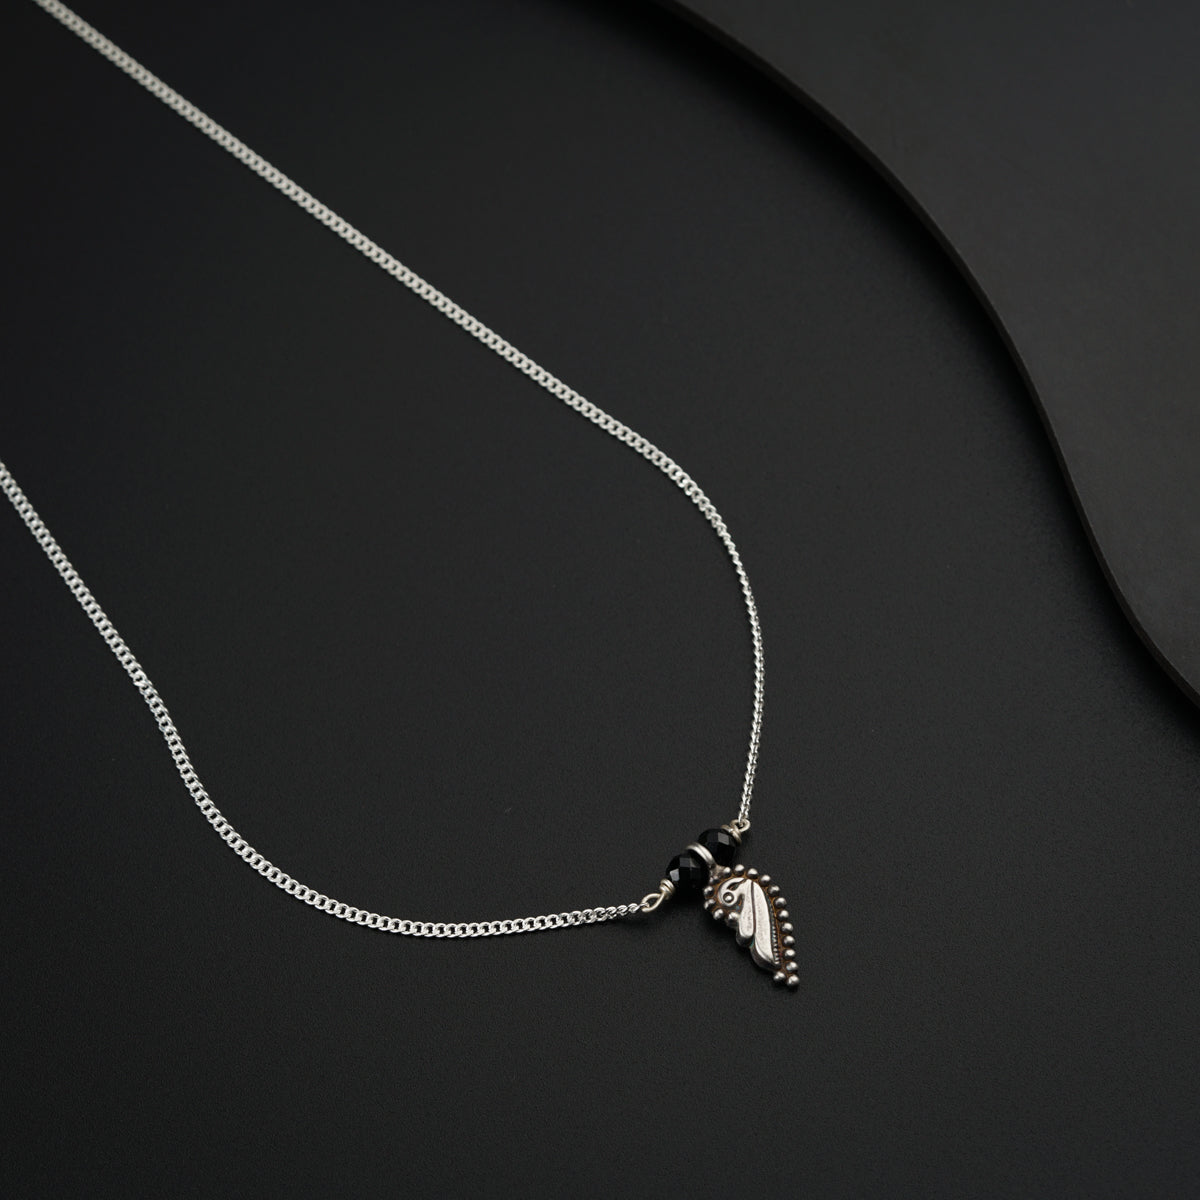 a silver necklace with a bird on it